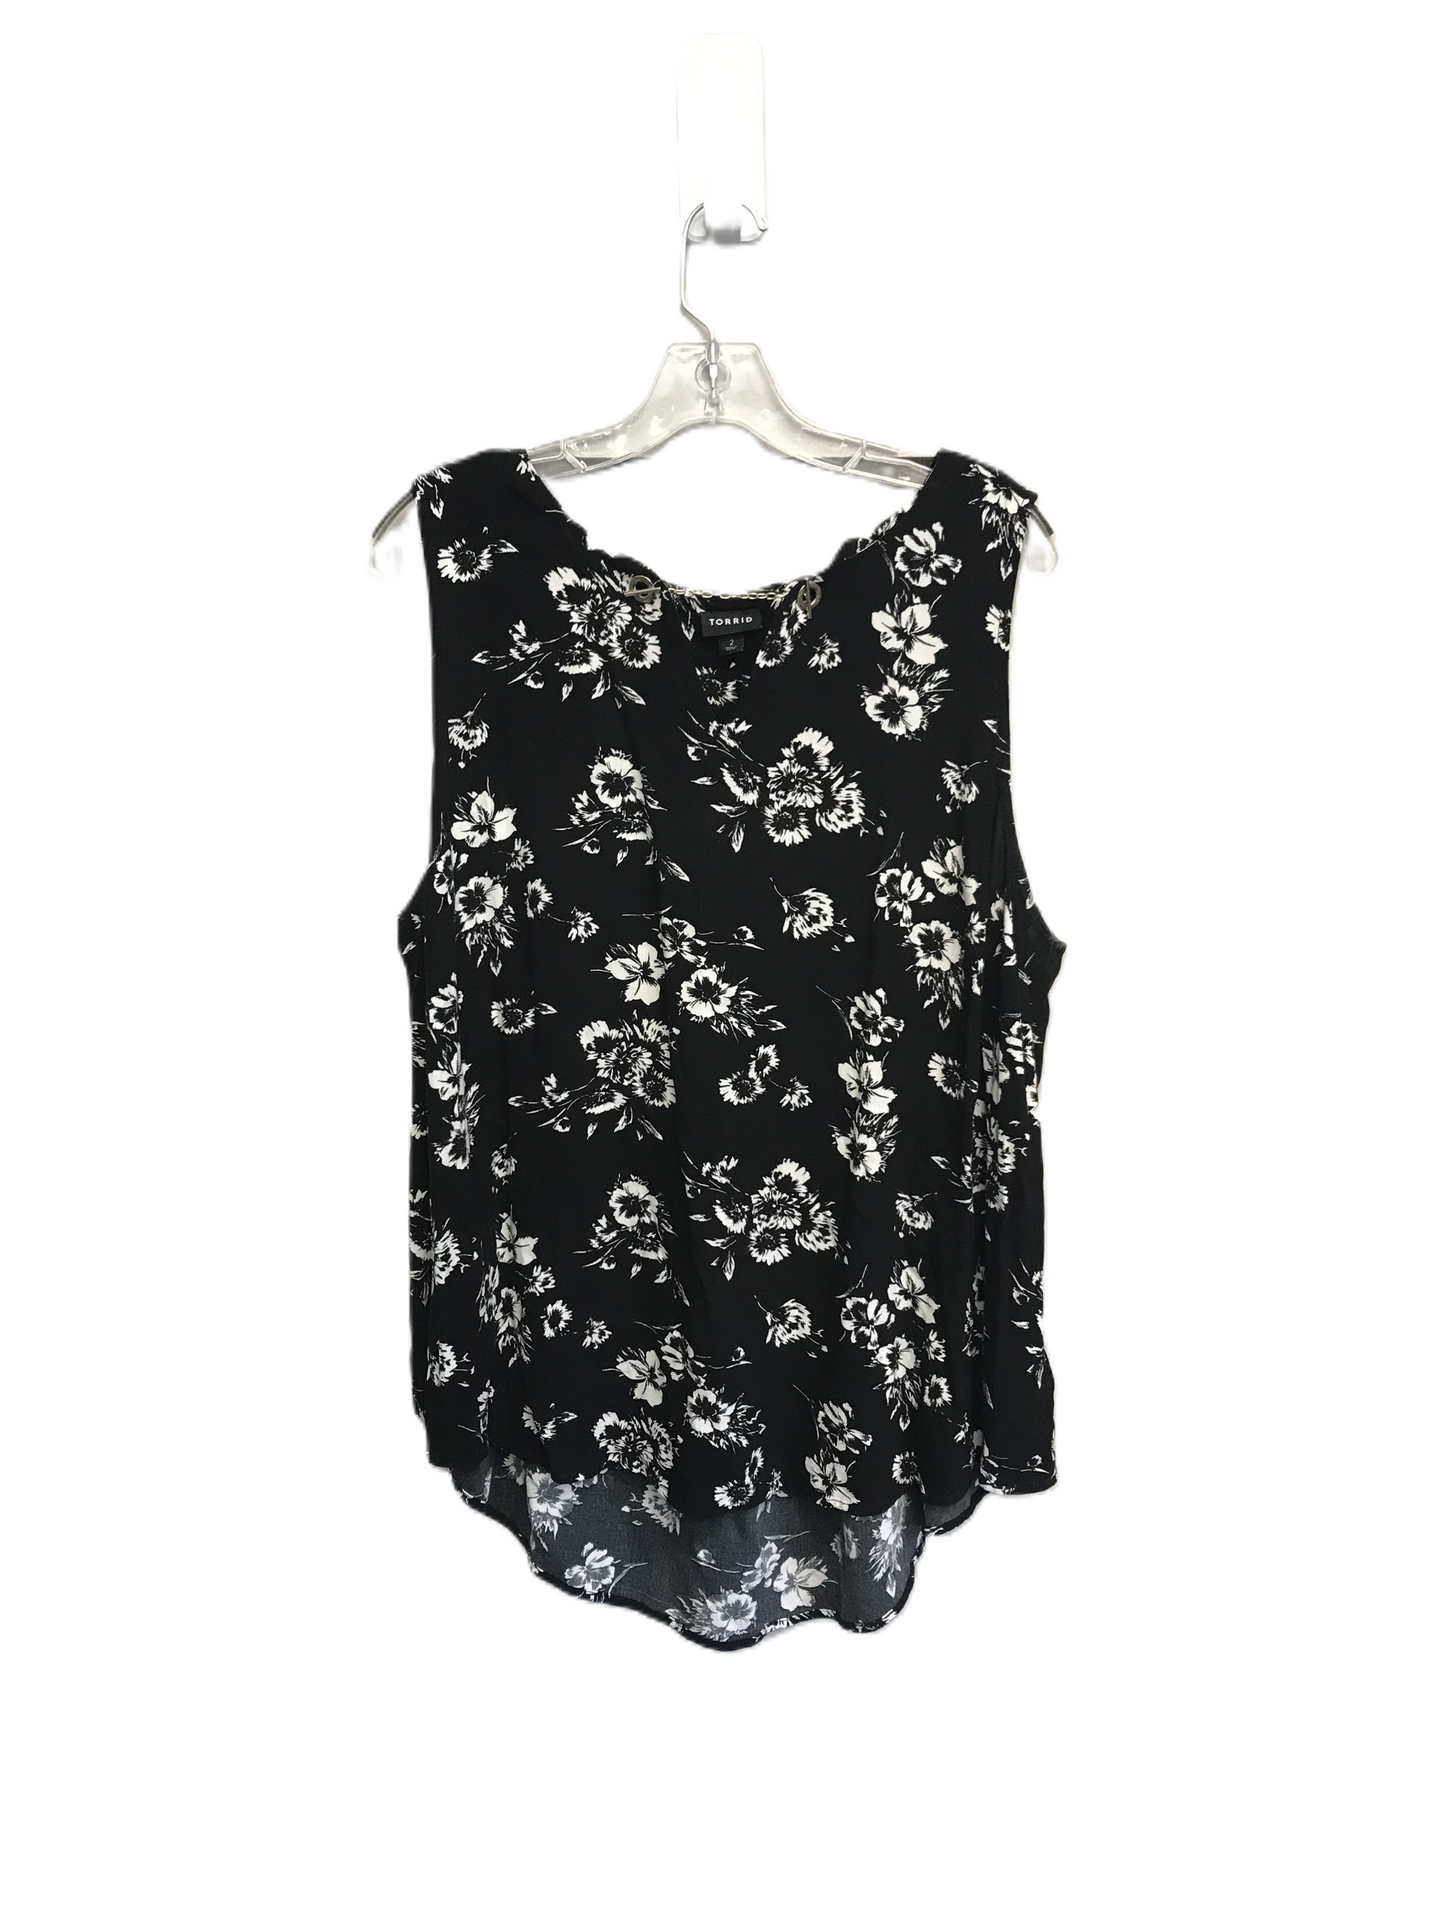 Floral Print Top Sleeveless By Torrid, Size: 2x